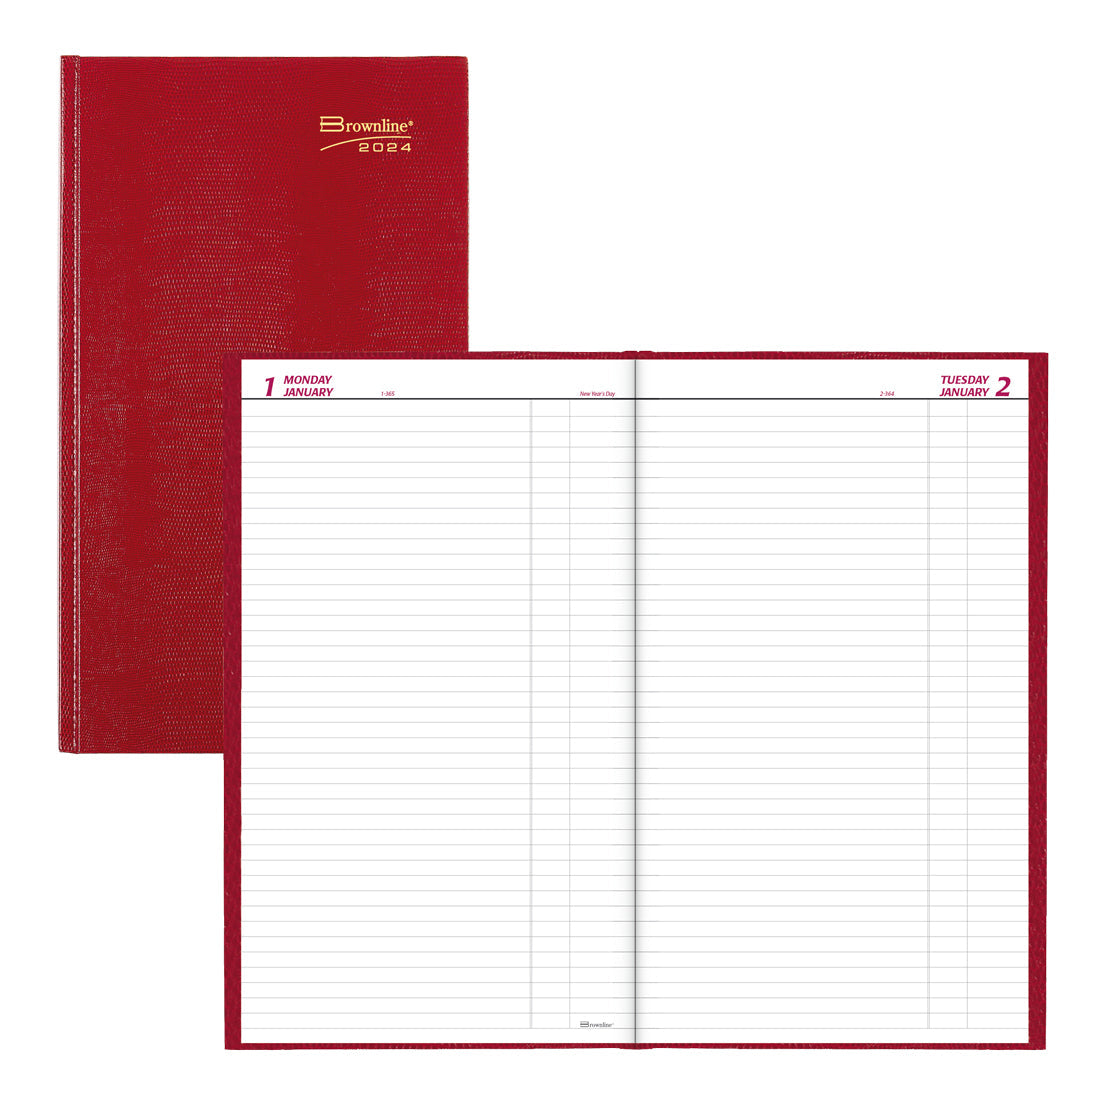 Daily Planner 2024*2024 Edition now sold out